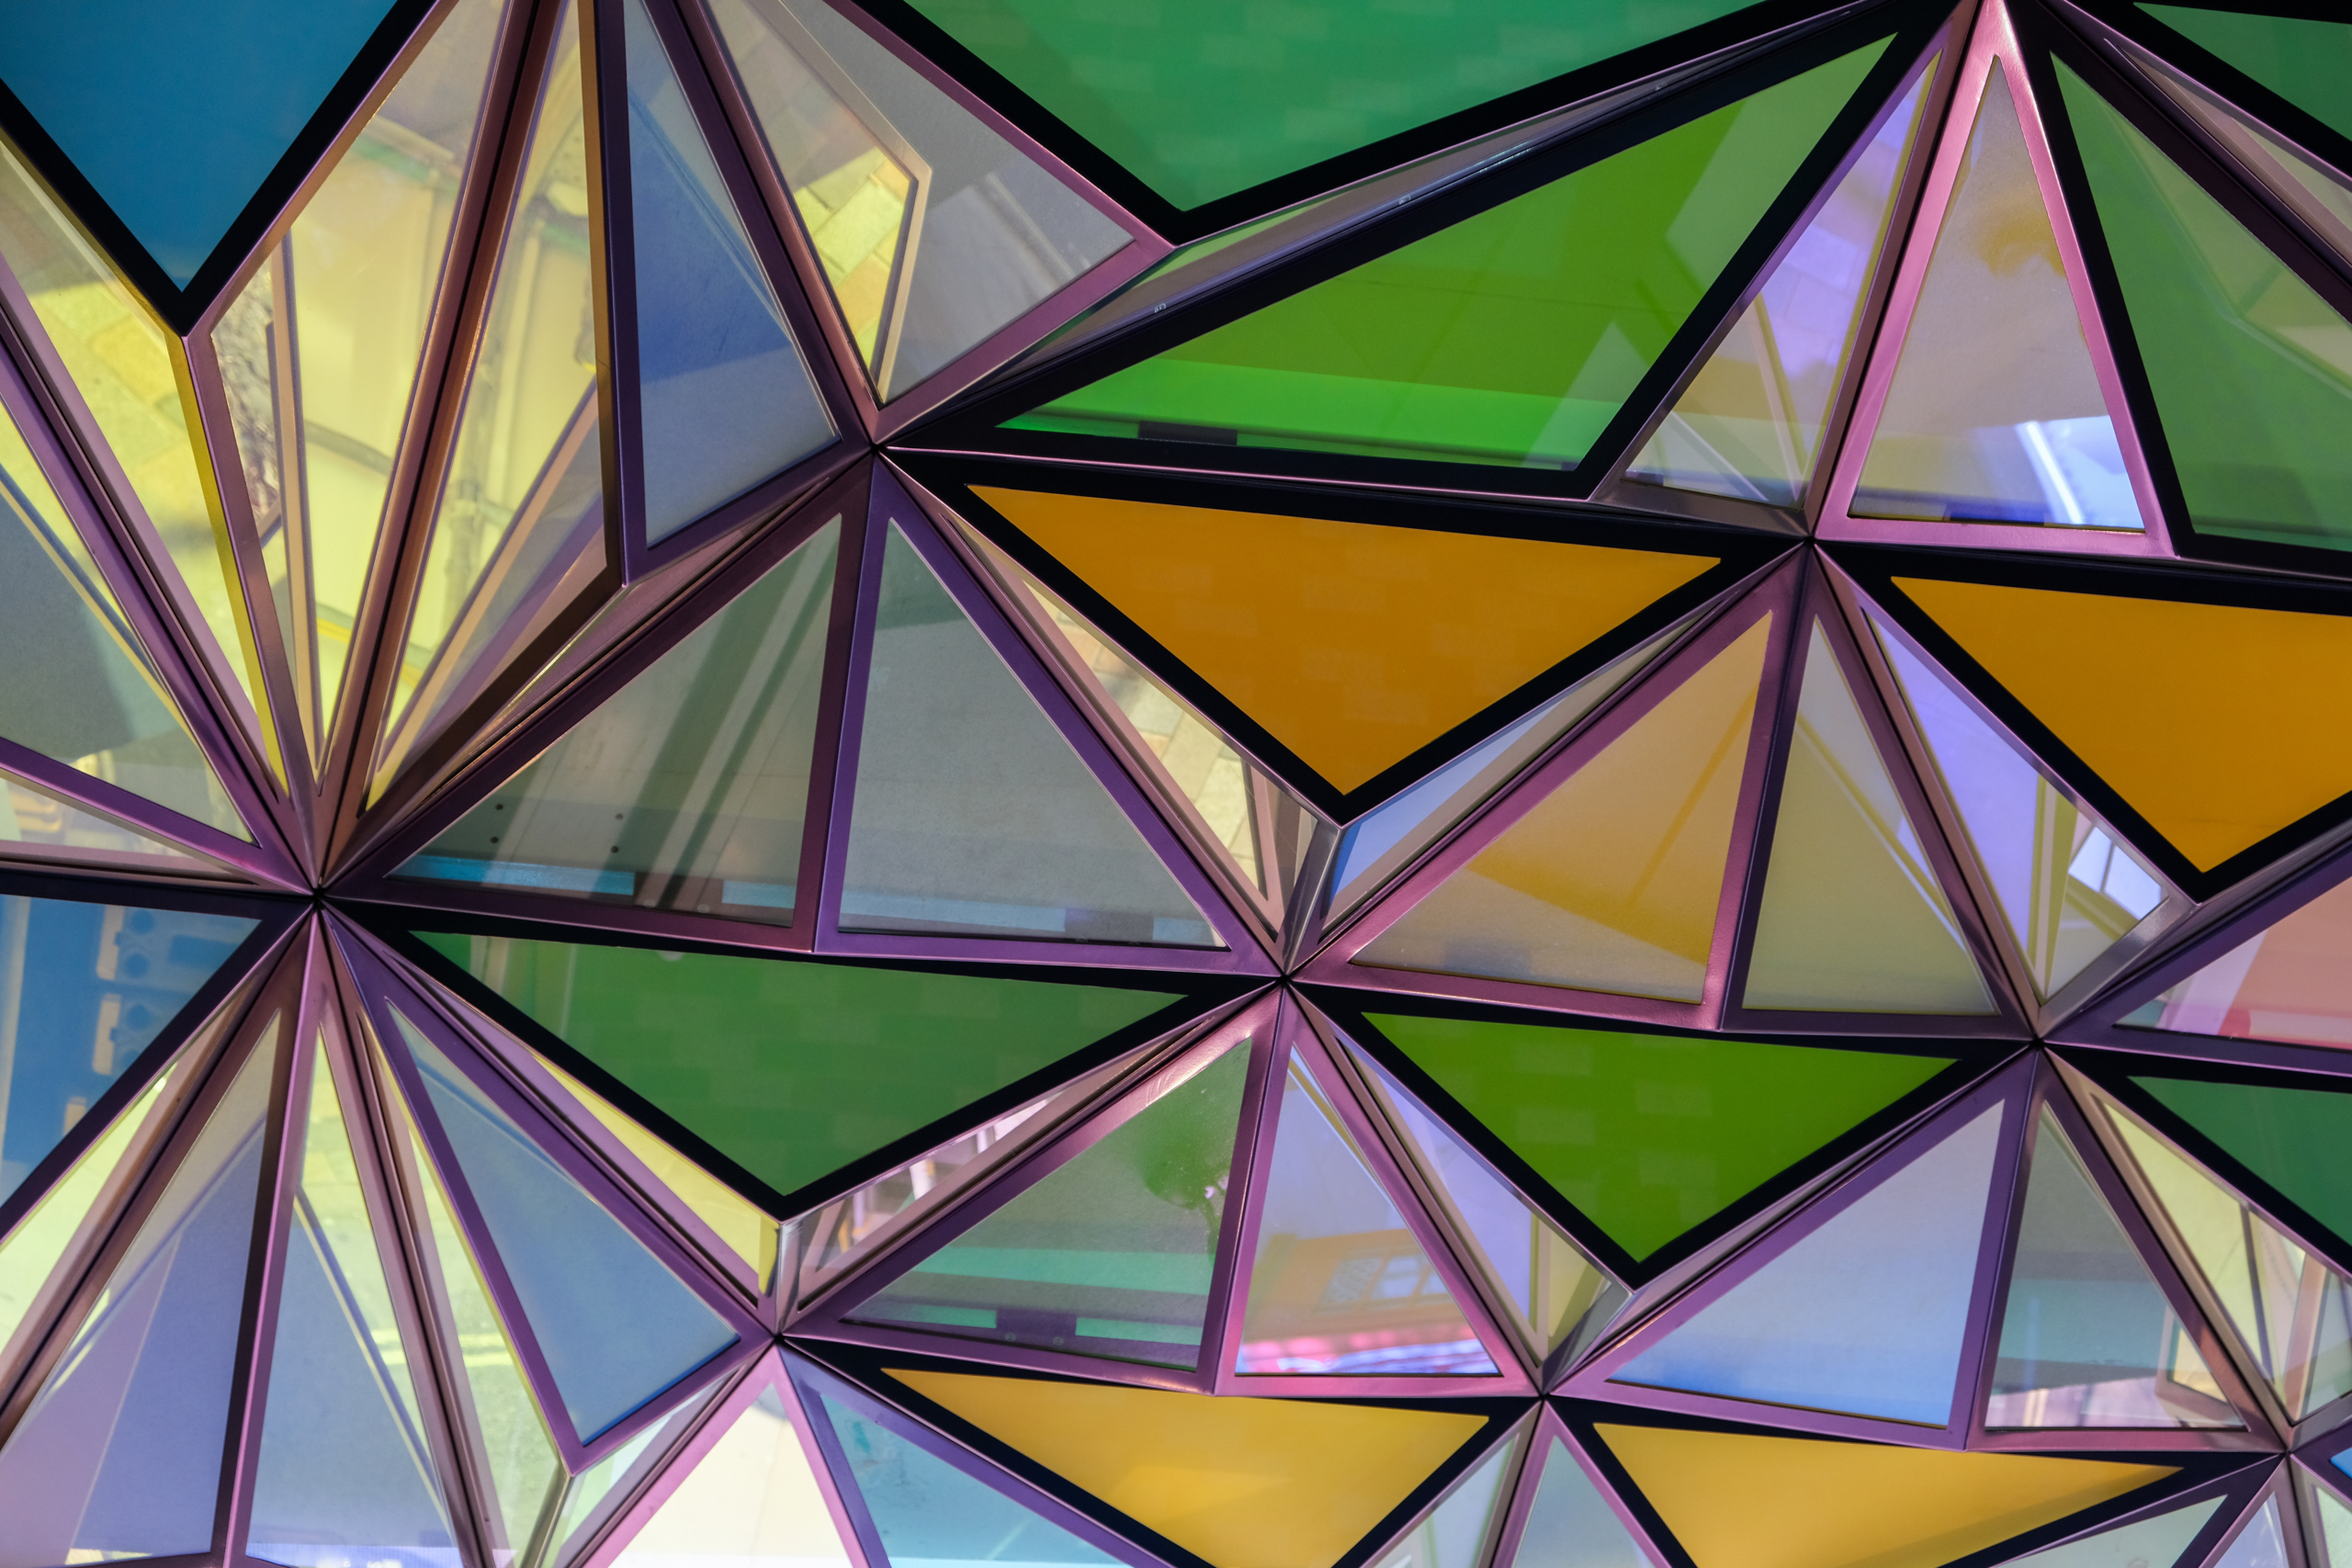 Colourful triangular patterned glass roof.